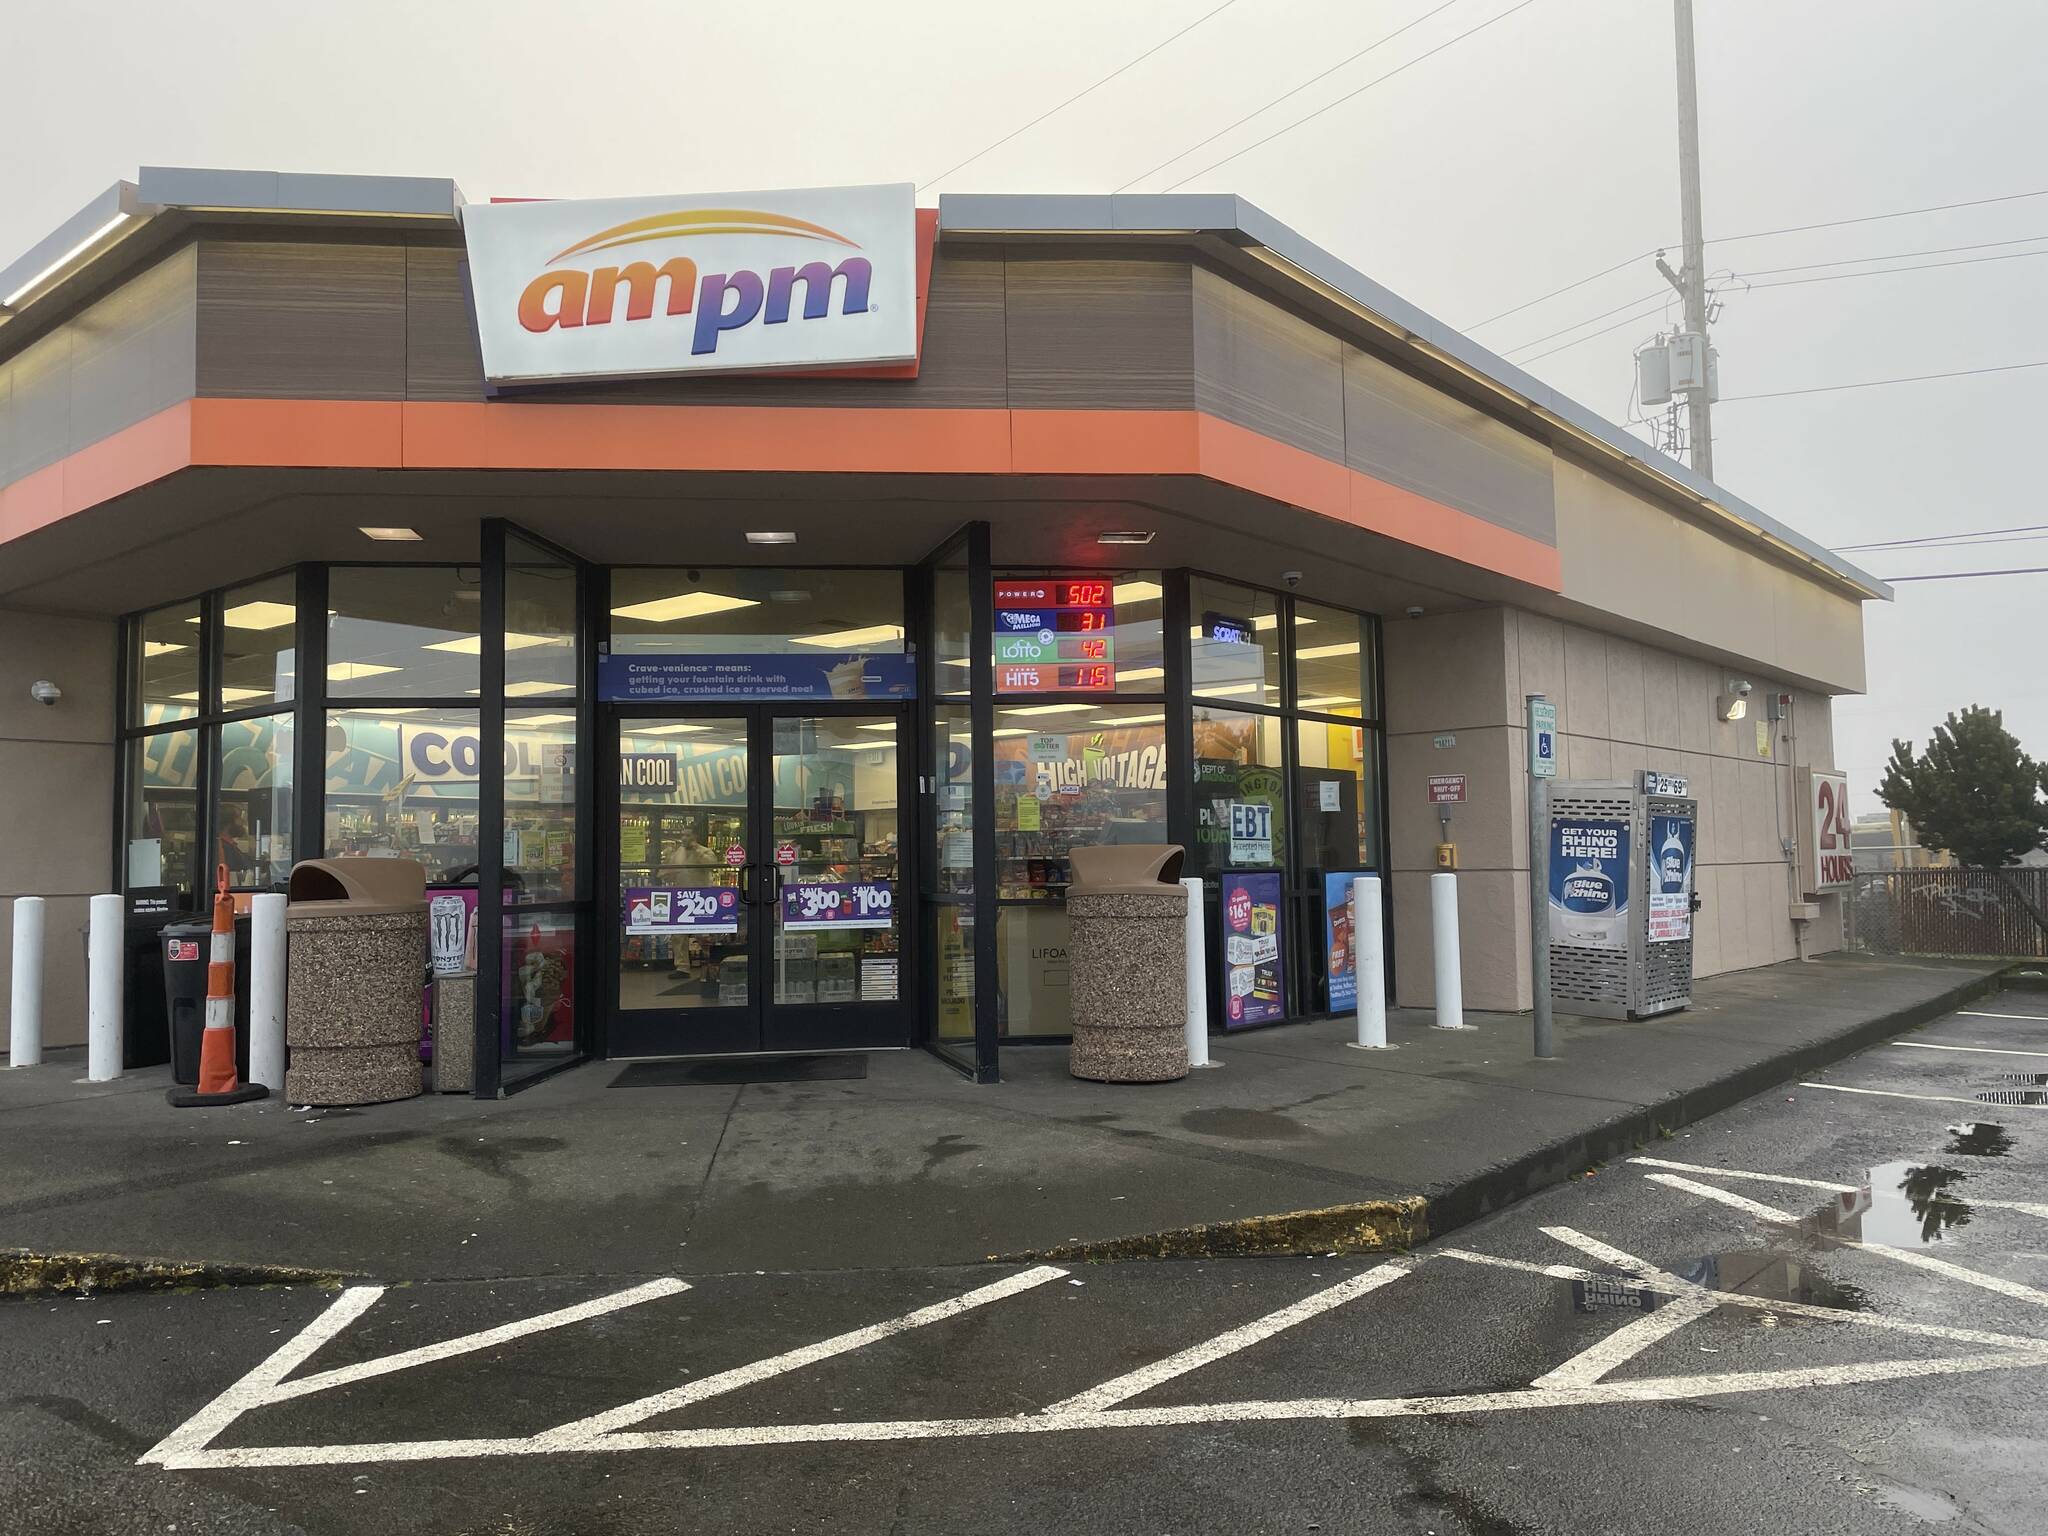 A man was arrested Sunday morning after passing a cashier at the ampm convenience store a note demanding the contents of the register. (Michael S. Lockett / The Daily World)